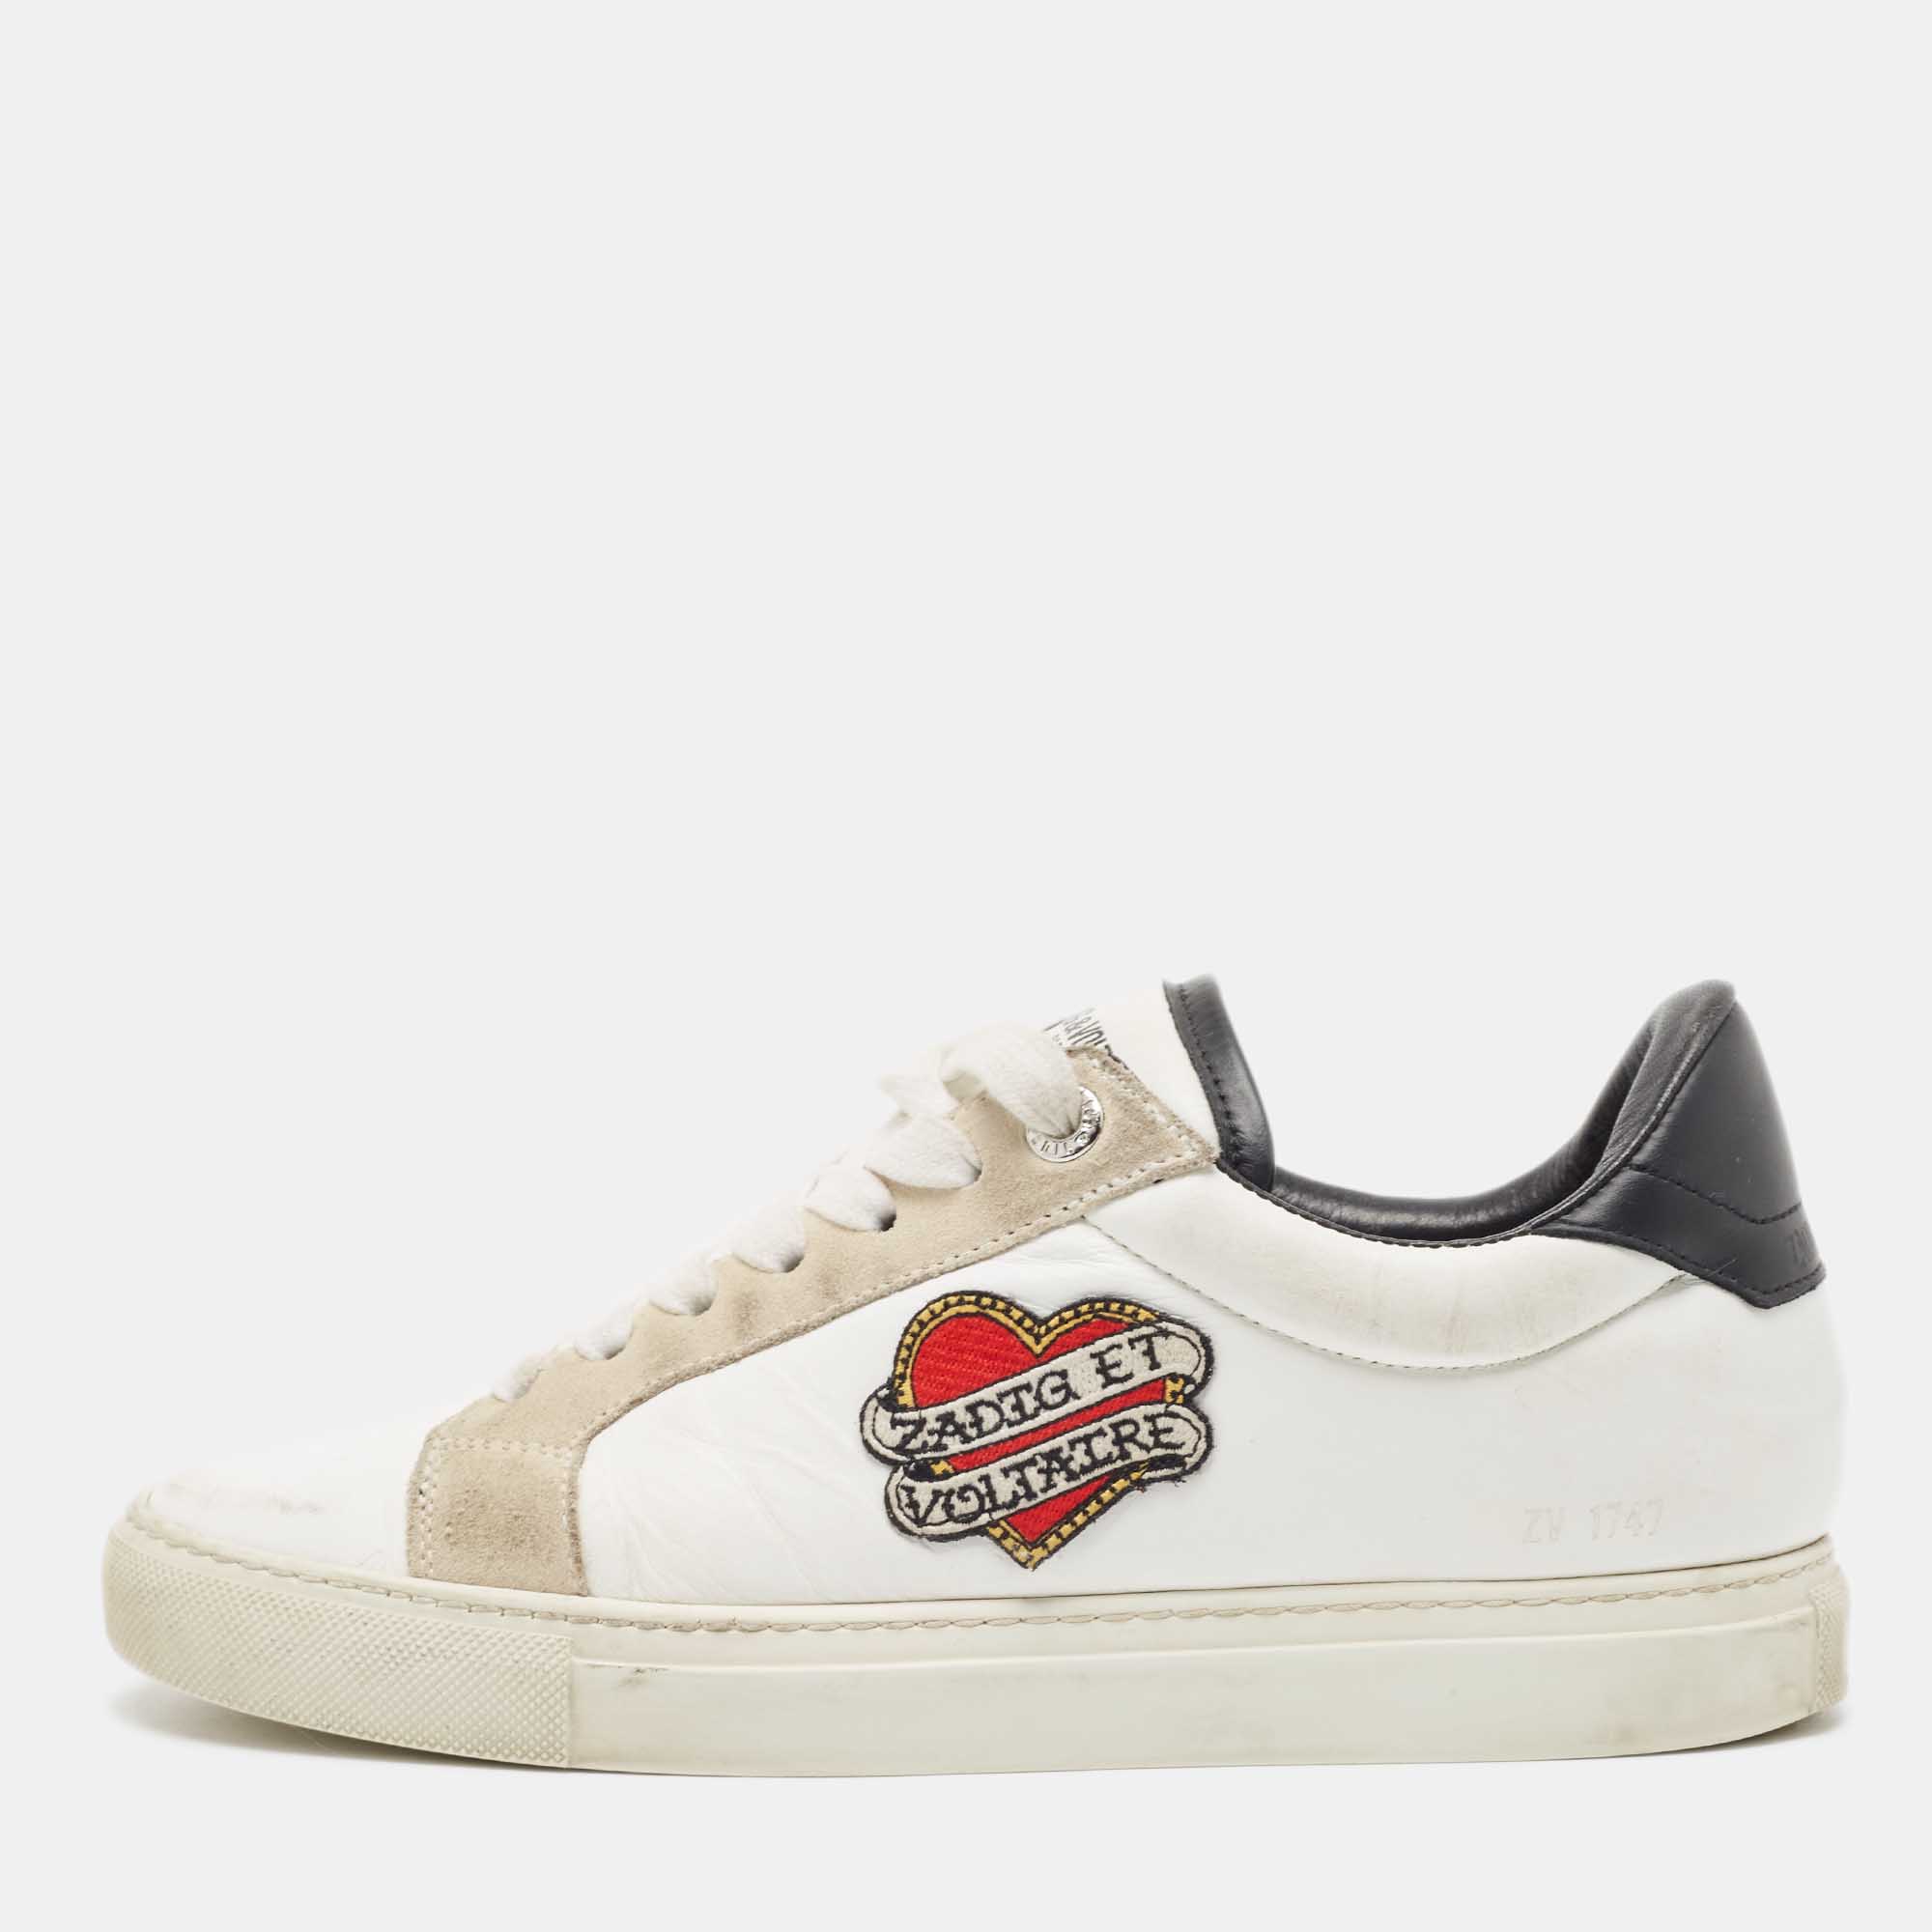 

Zadig & Voltaire White Low Top Sneakers Size